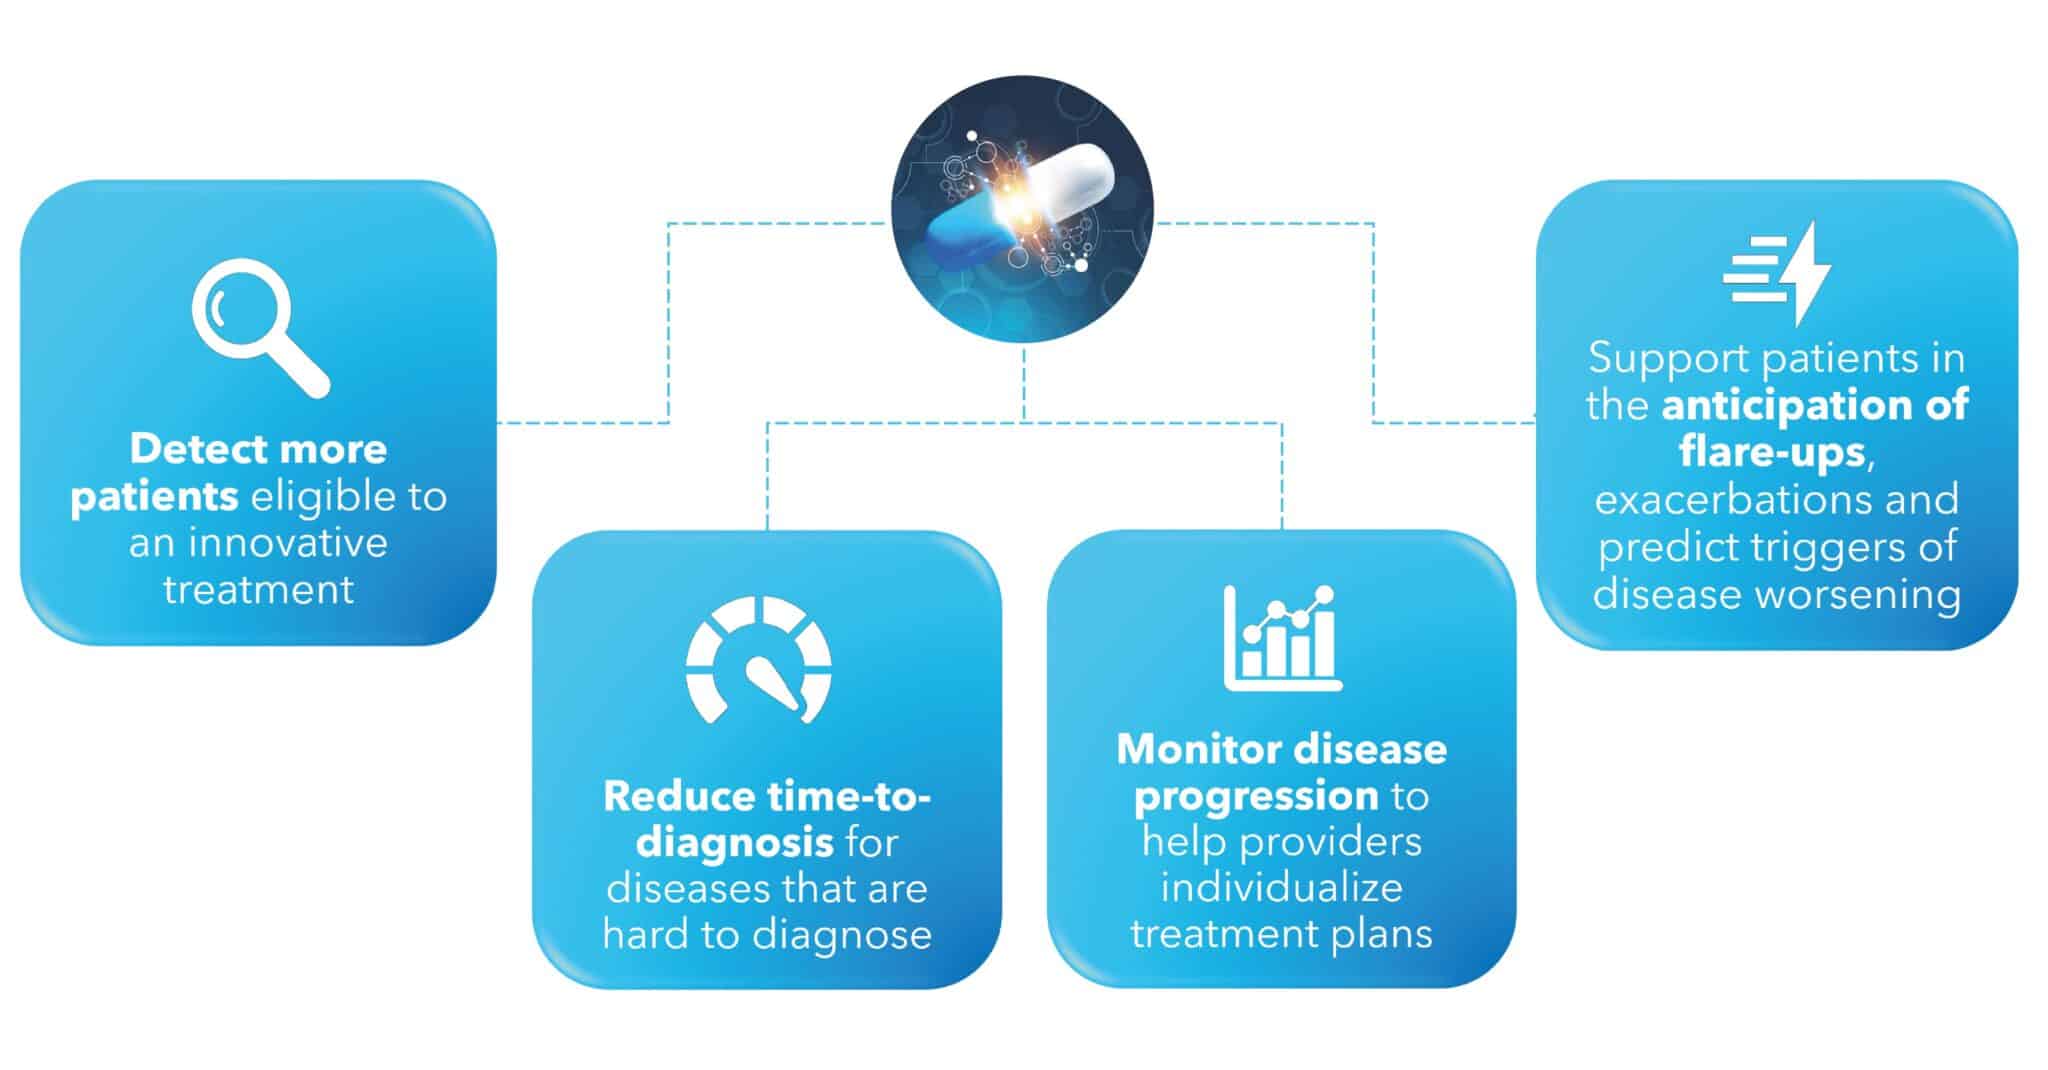 Graph with 4 advantages of ai diagnosis: detect more patients, reduce time-to-diagnosis, monitor disease progression and anticipation of flare-ups